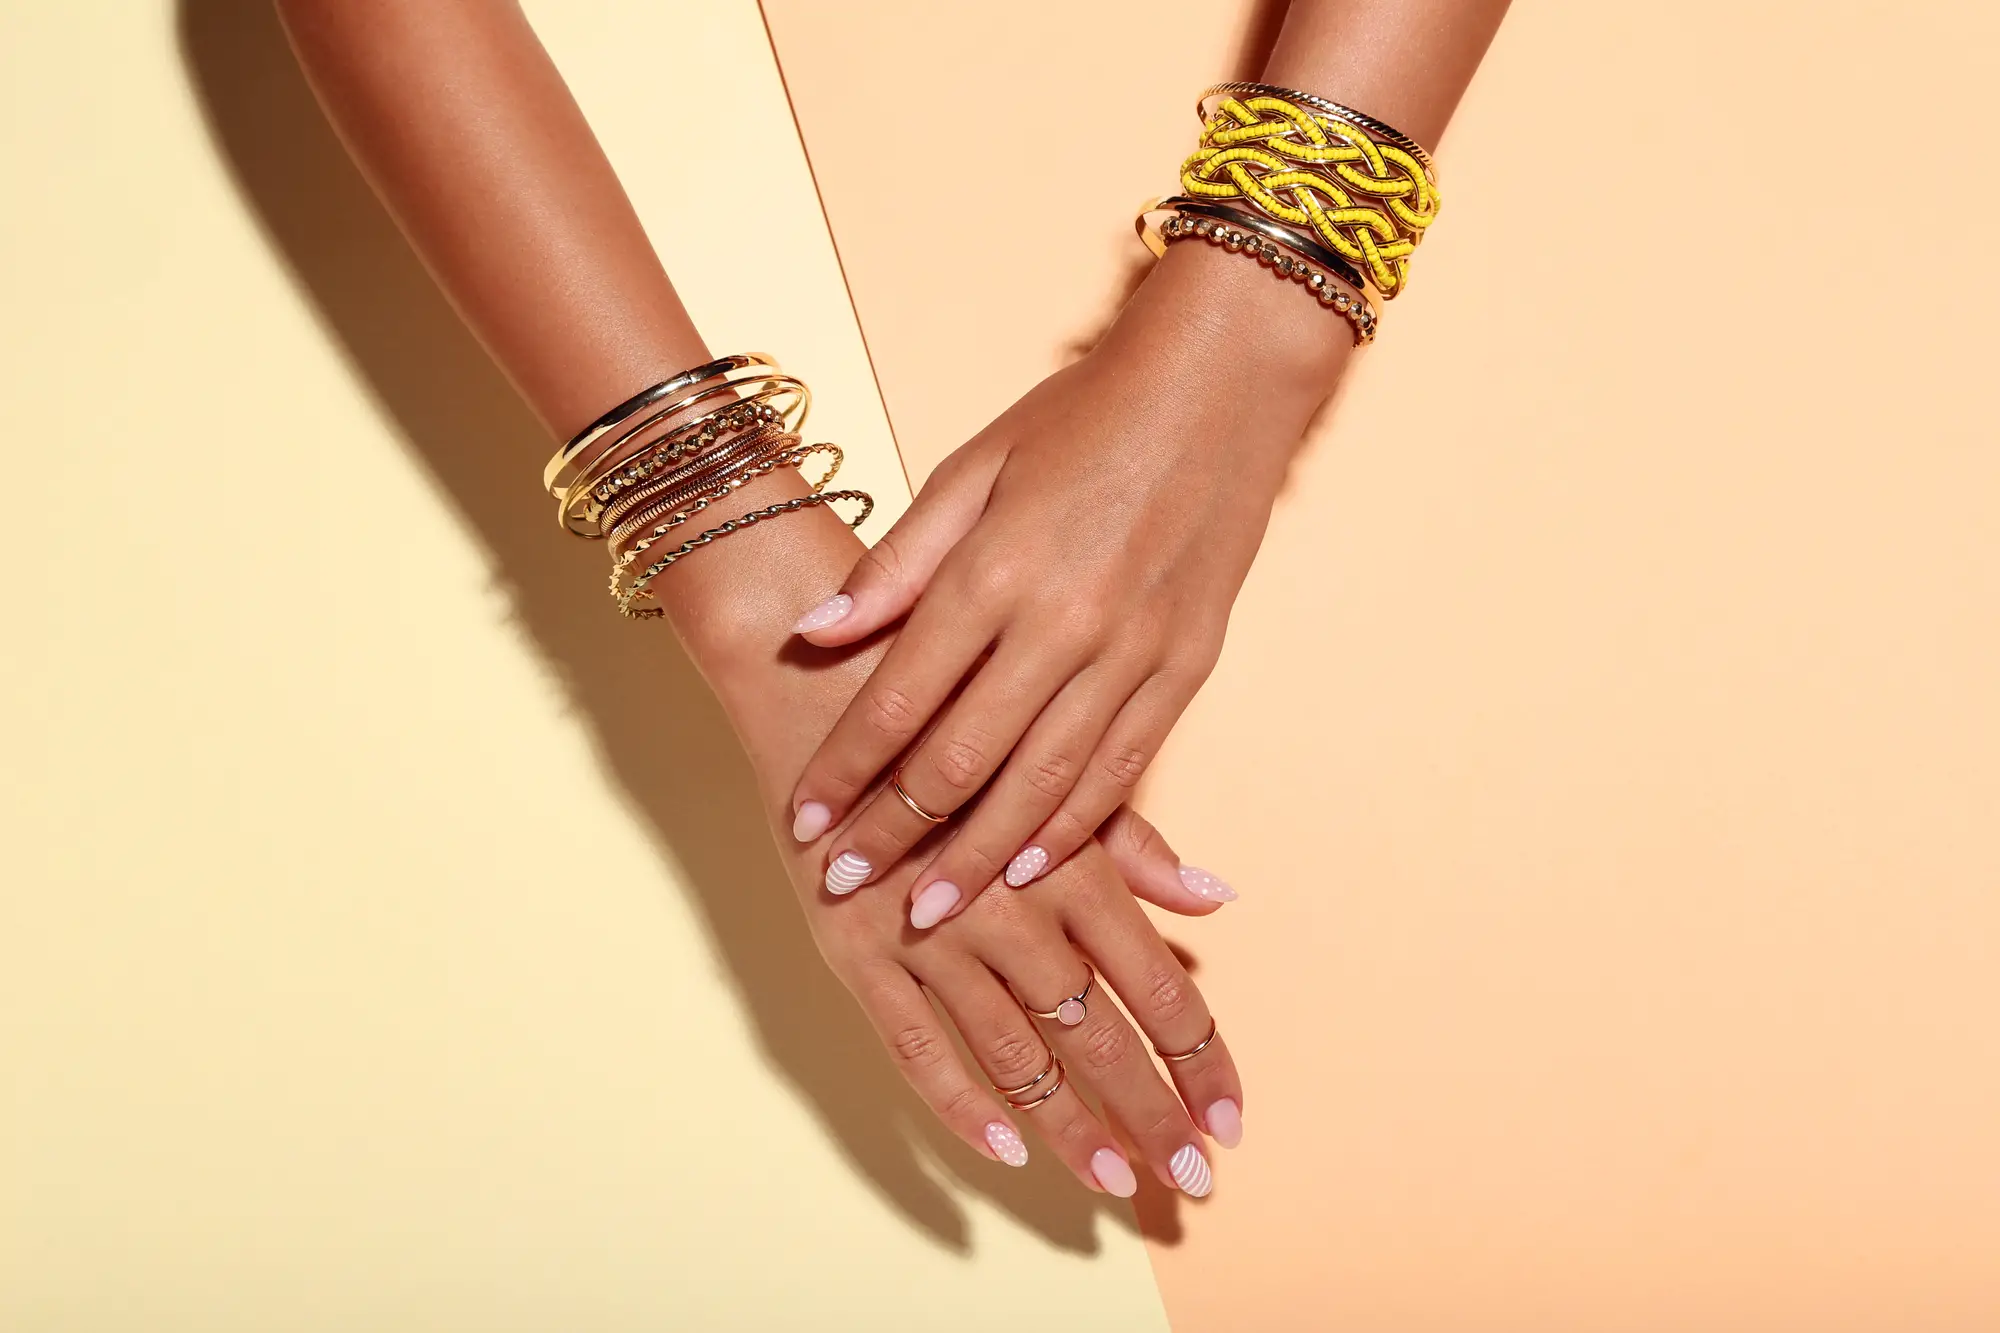 Female hands with bracelets and rings on colorful background